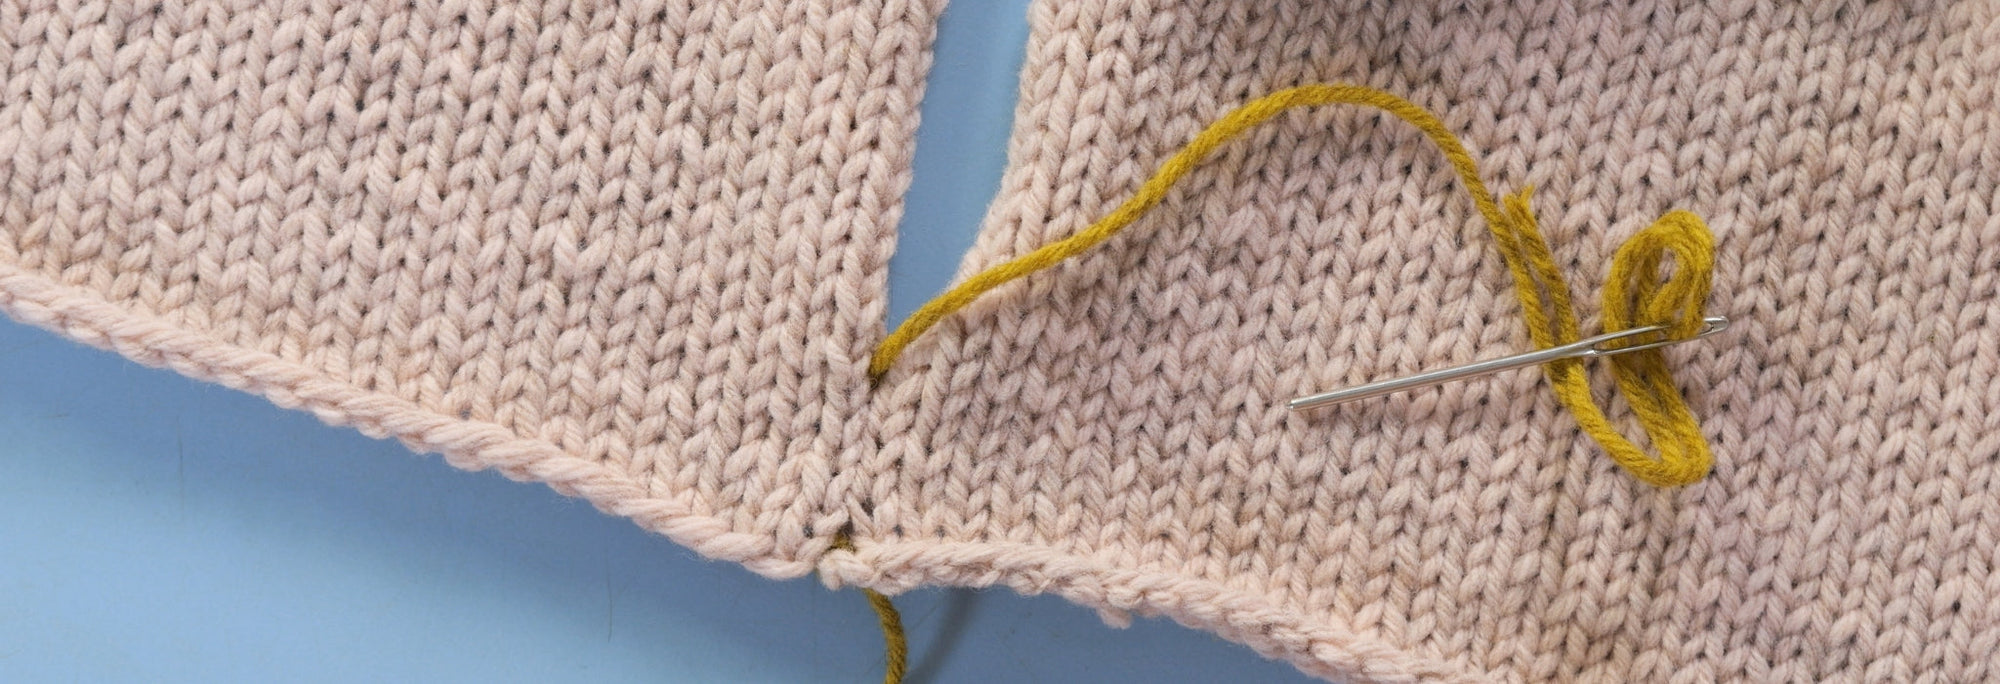 The beginning of a mattress stitch in contrasting yarn